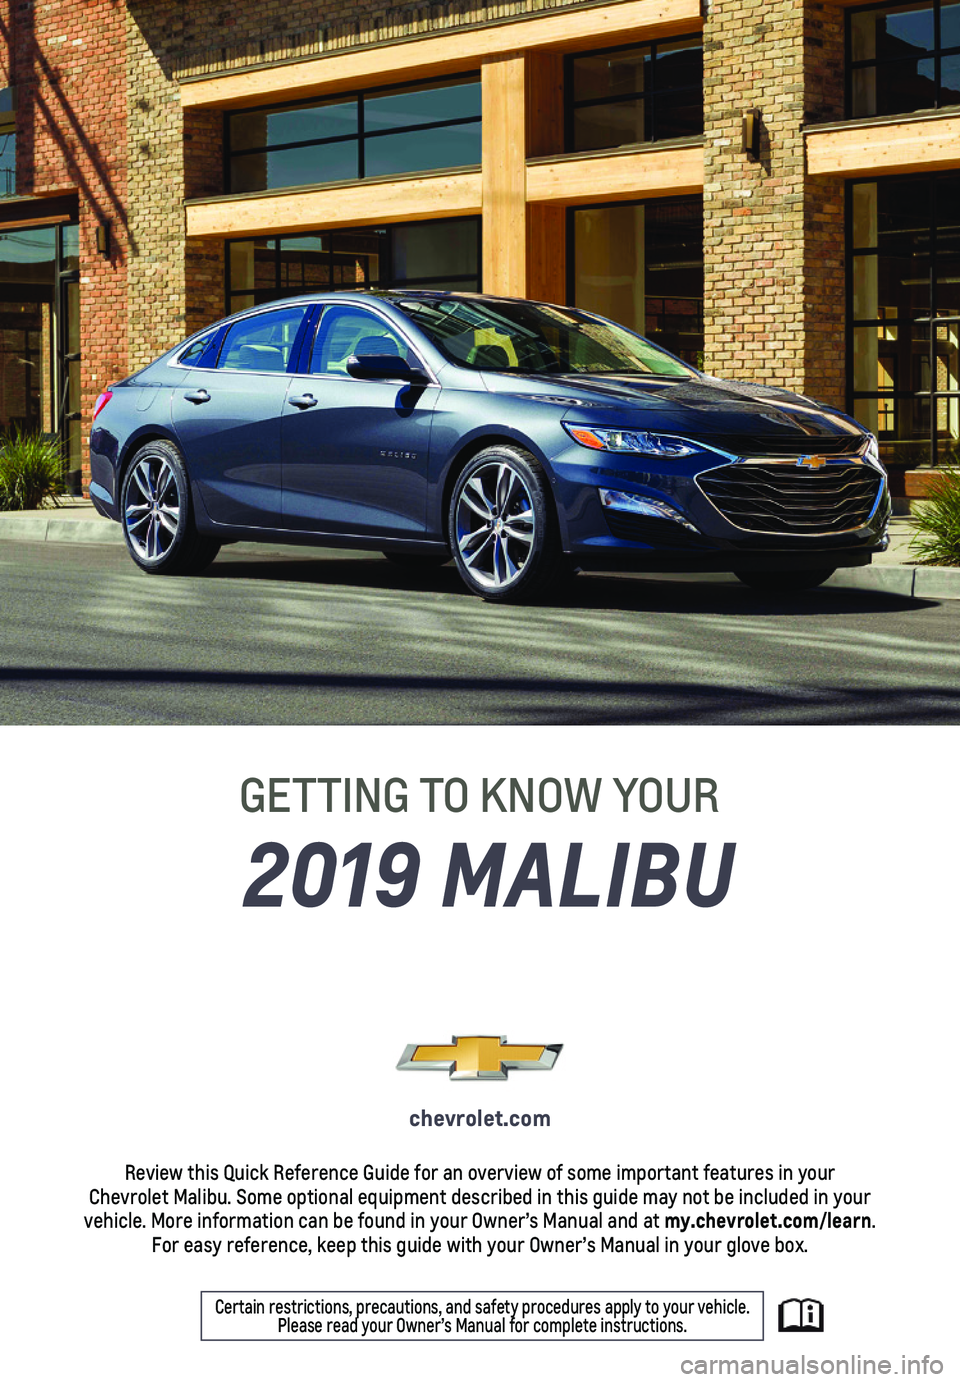 CHEVROLET MALIBU 2019  Get To Know Guide 1
2019 MALIBU
GETTING TO KNOW YOUR
chevrolet.com
Review this Quick Reference Guide for an overview of some important feat\
ures in your  Chevrolet Malibu. Some optional equipment described in this gui